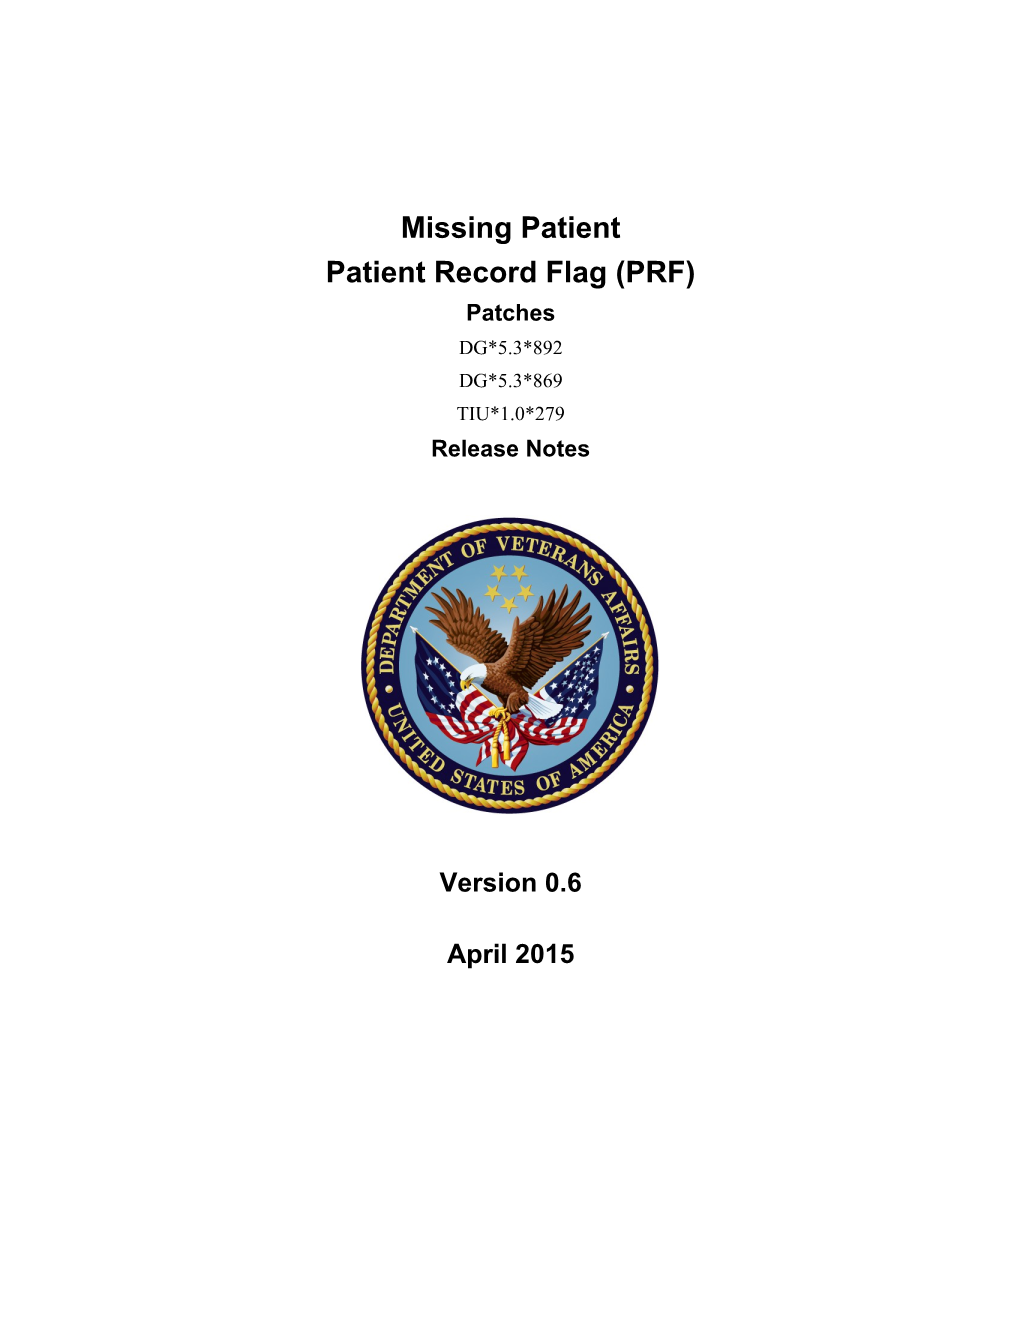 Missing Patient PRF Release Notes